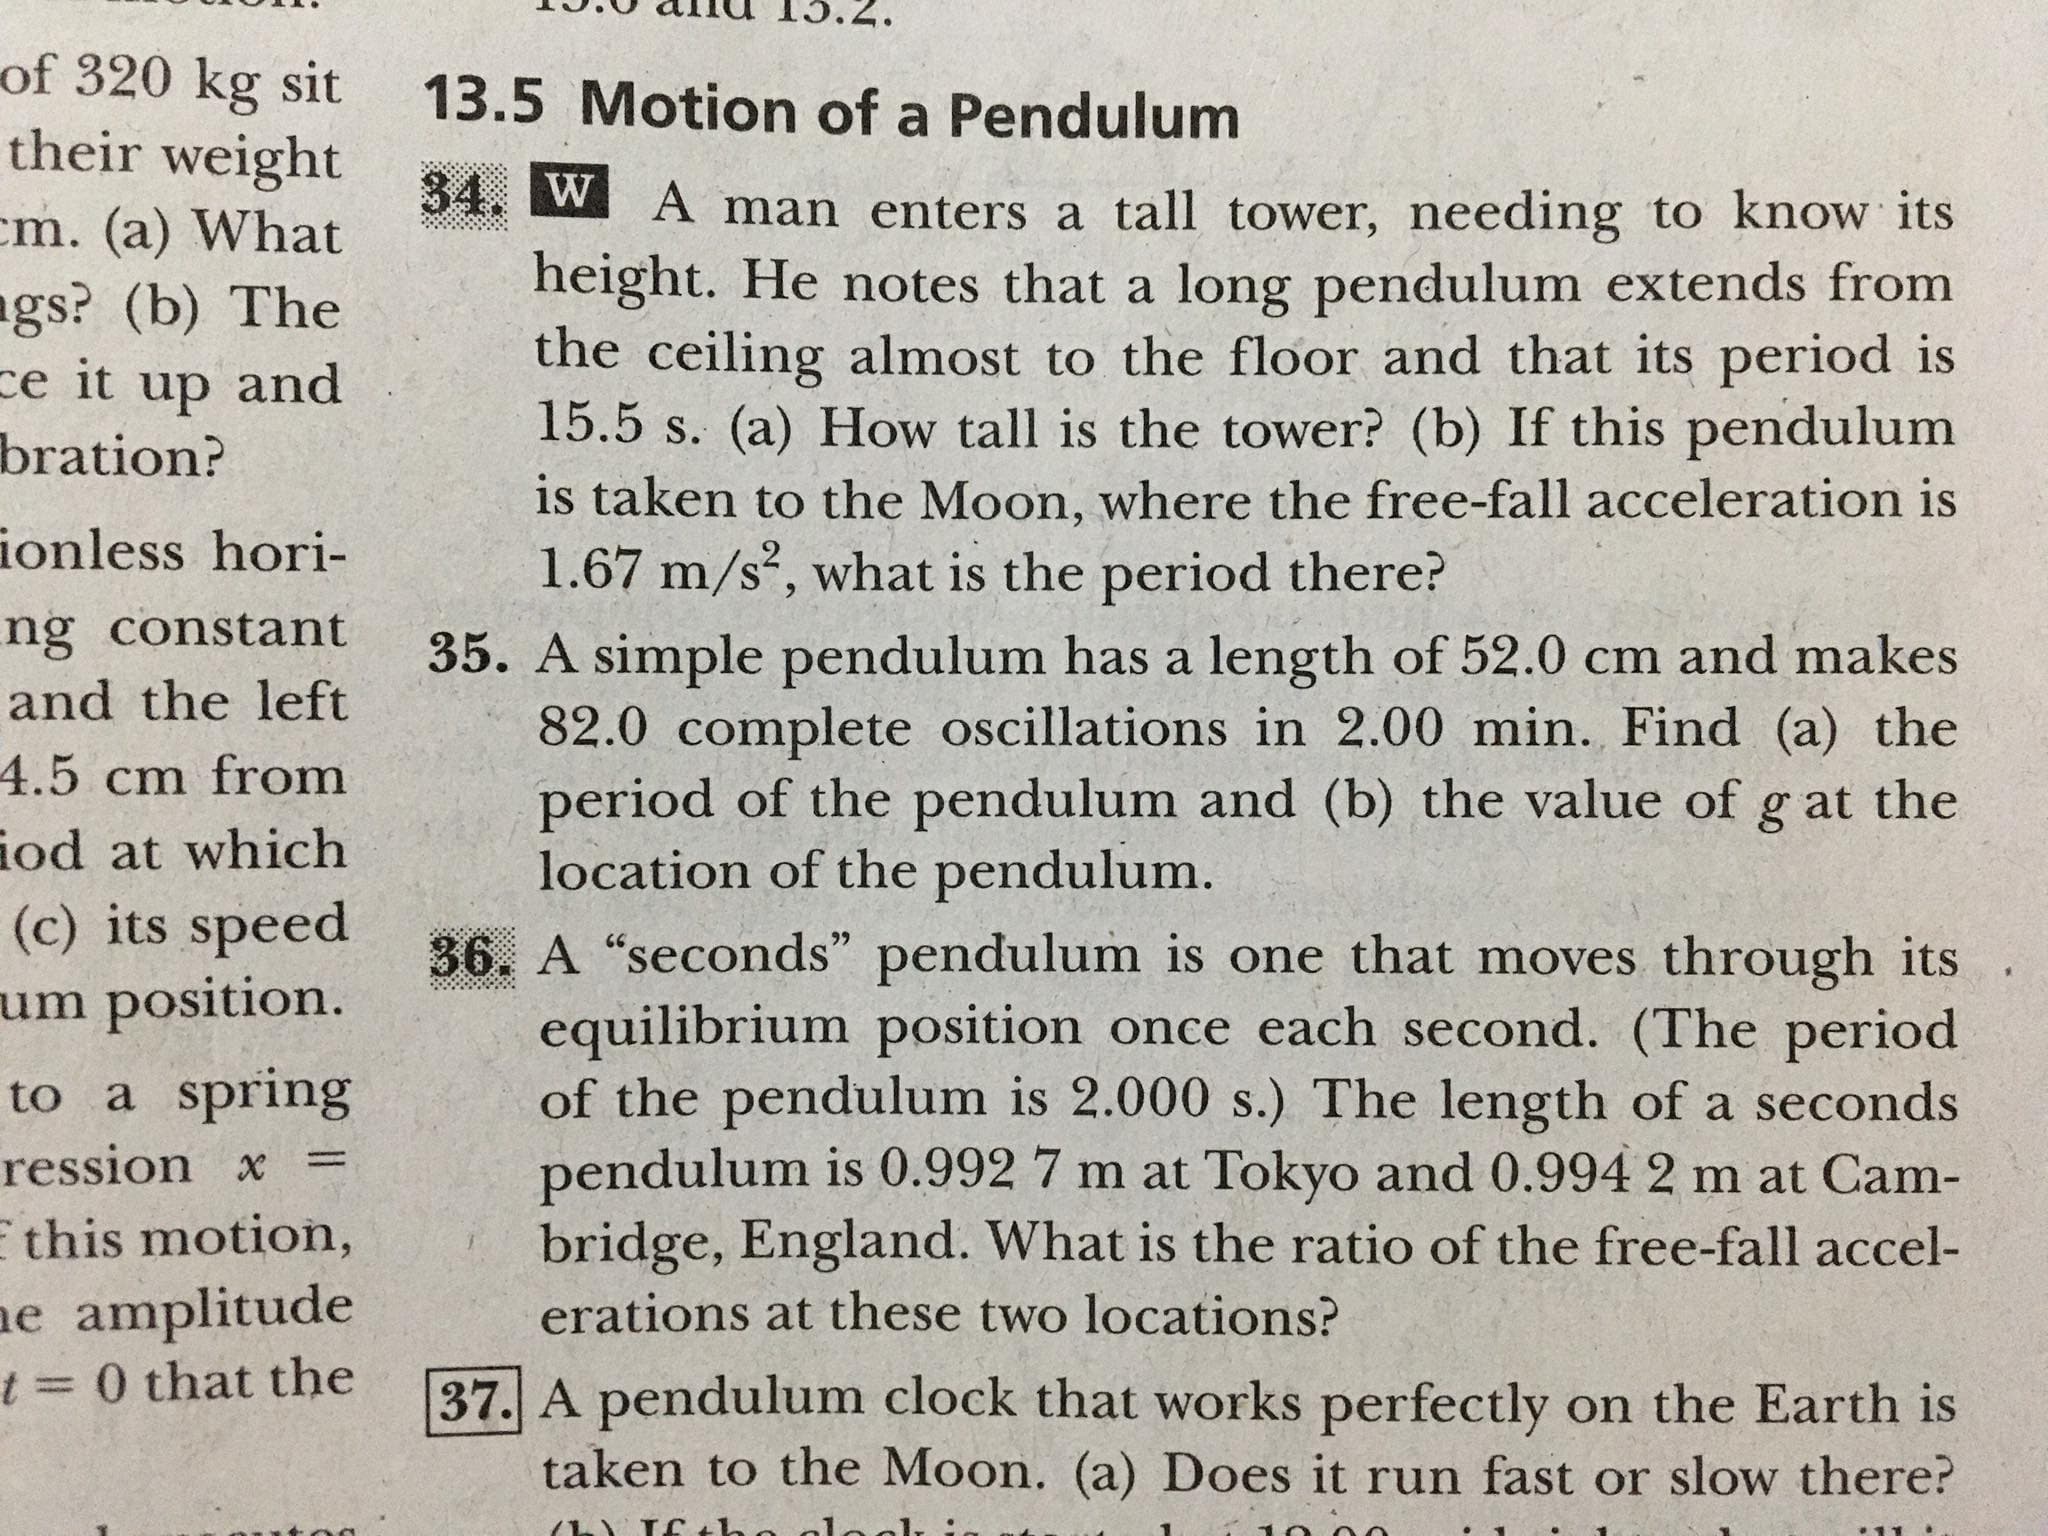 13.
*7'CI N
of 320 kg sit
13.5 Motion of a Pendulum
their weight
cm. (a) What
34. W A man enters a tall tower, needing to know its
ags? (b) The
ce it up and
bration?
height. He notes that a long pendulum extends from
the ceiling almost to the floor and that its period is
15.5 s. (a) How tall is the tower? (b) If this pendulum
is taken to the Moon, where the free-fall acceleration is
1.67 m/s, what is the period there?
ionless hori-
ng constant
and the left
35. A simple pendulum has a length of 52.0 cm and makes
82.0 complete oscillations in 2.00 min. Find (a) the
period of the pendulum and (b) the value of g at the
location of the pendulum.
4.5 cm from
iod at which
(c) its speed
um position.
36. A "seconds" pendulum is one that moves through its
equilibrium position once each second. (The period
of the pendulum is 2.000 s.) The length of a seconds
pendulum is 0.992 7 m at Tokyo and 0.994 2 m at Cam-
bridge, England. What is the ratio of the free-fall accel-
erations at these two locations?
to a spring
ression x =
E this motion,
ne amplitude
t 3D 0 that the
37. A pendulum clock that works perfectly on the Earth is
taken to the Moon. (a) Does it run fast or slow there?
